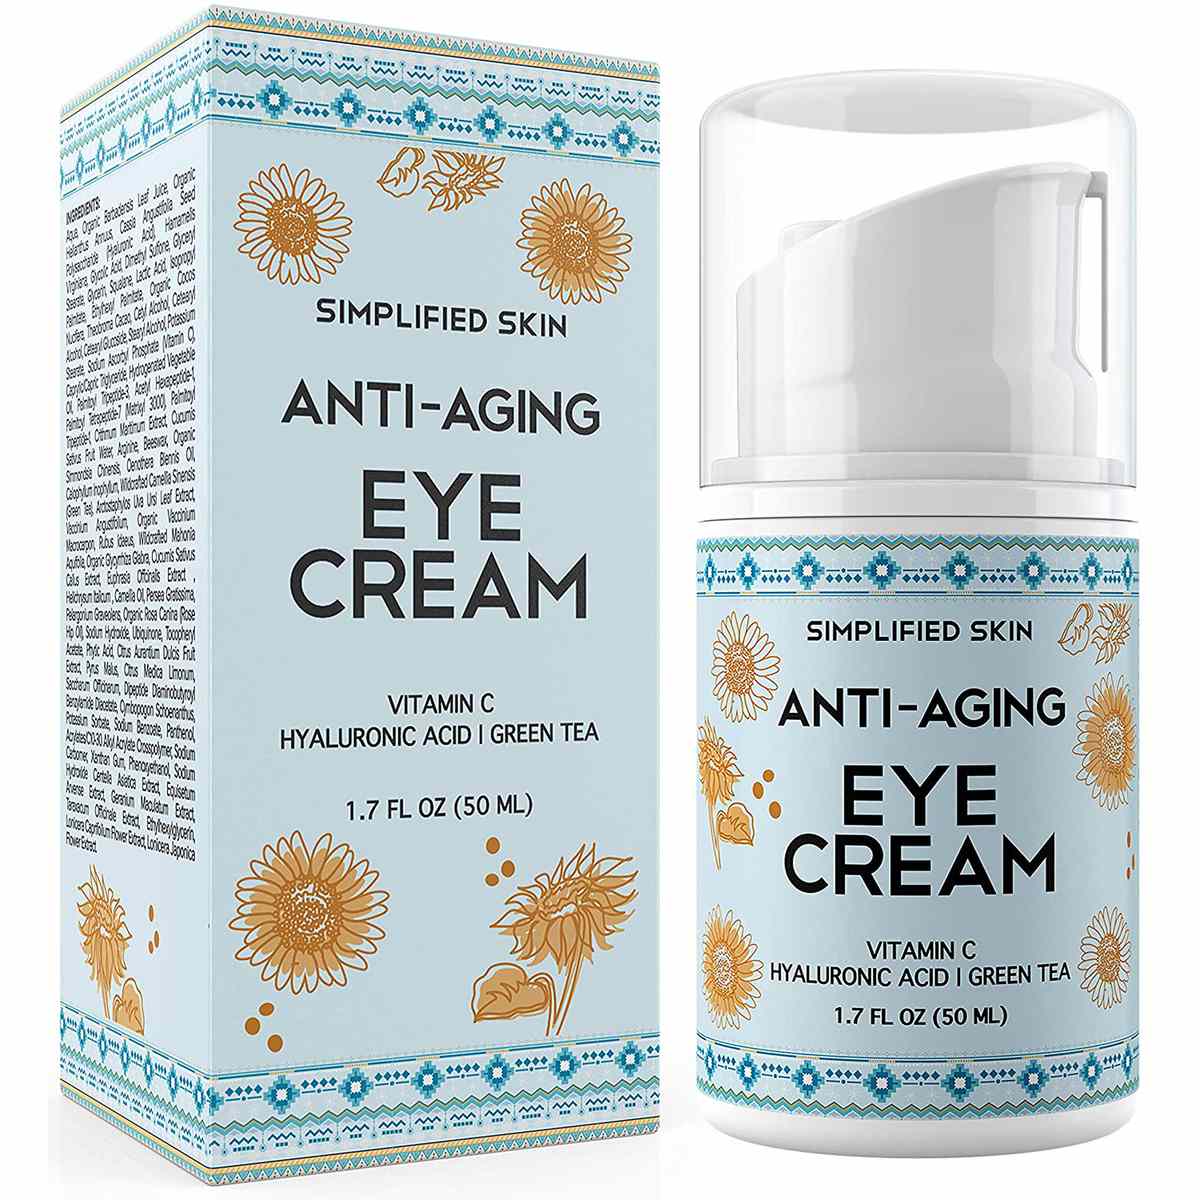 Anti-Aging Eye Cream for Dark Circles,Wrinkles,Bags & Puffiness